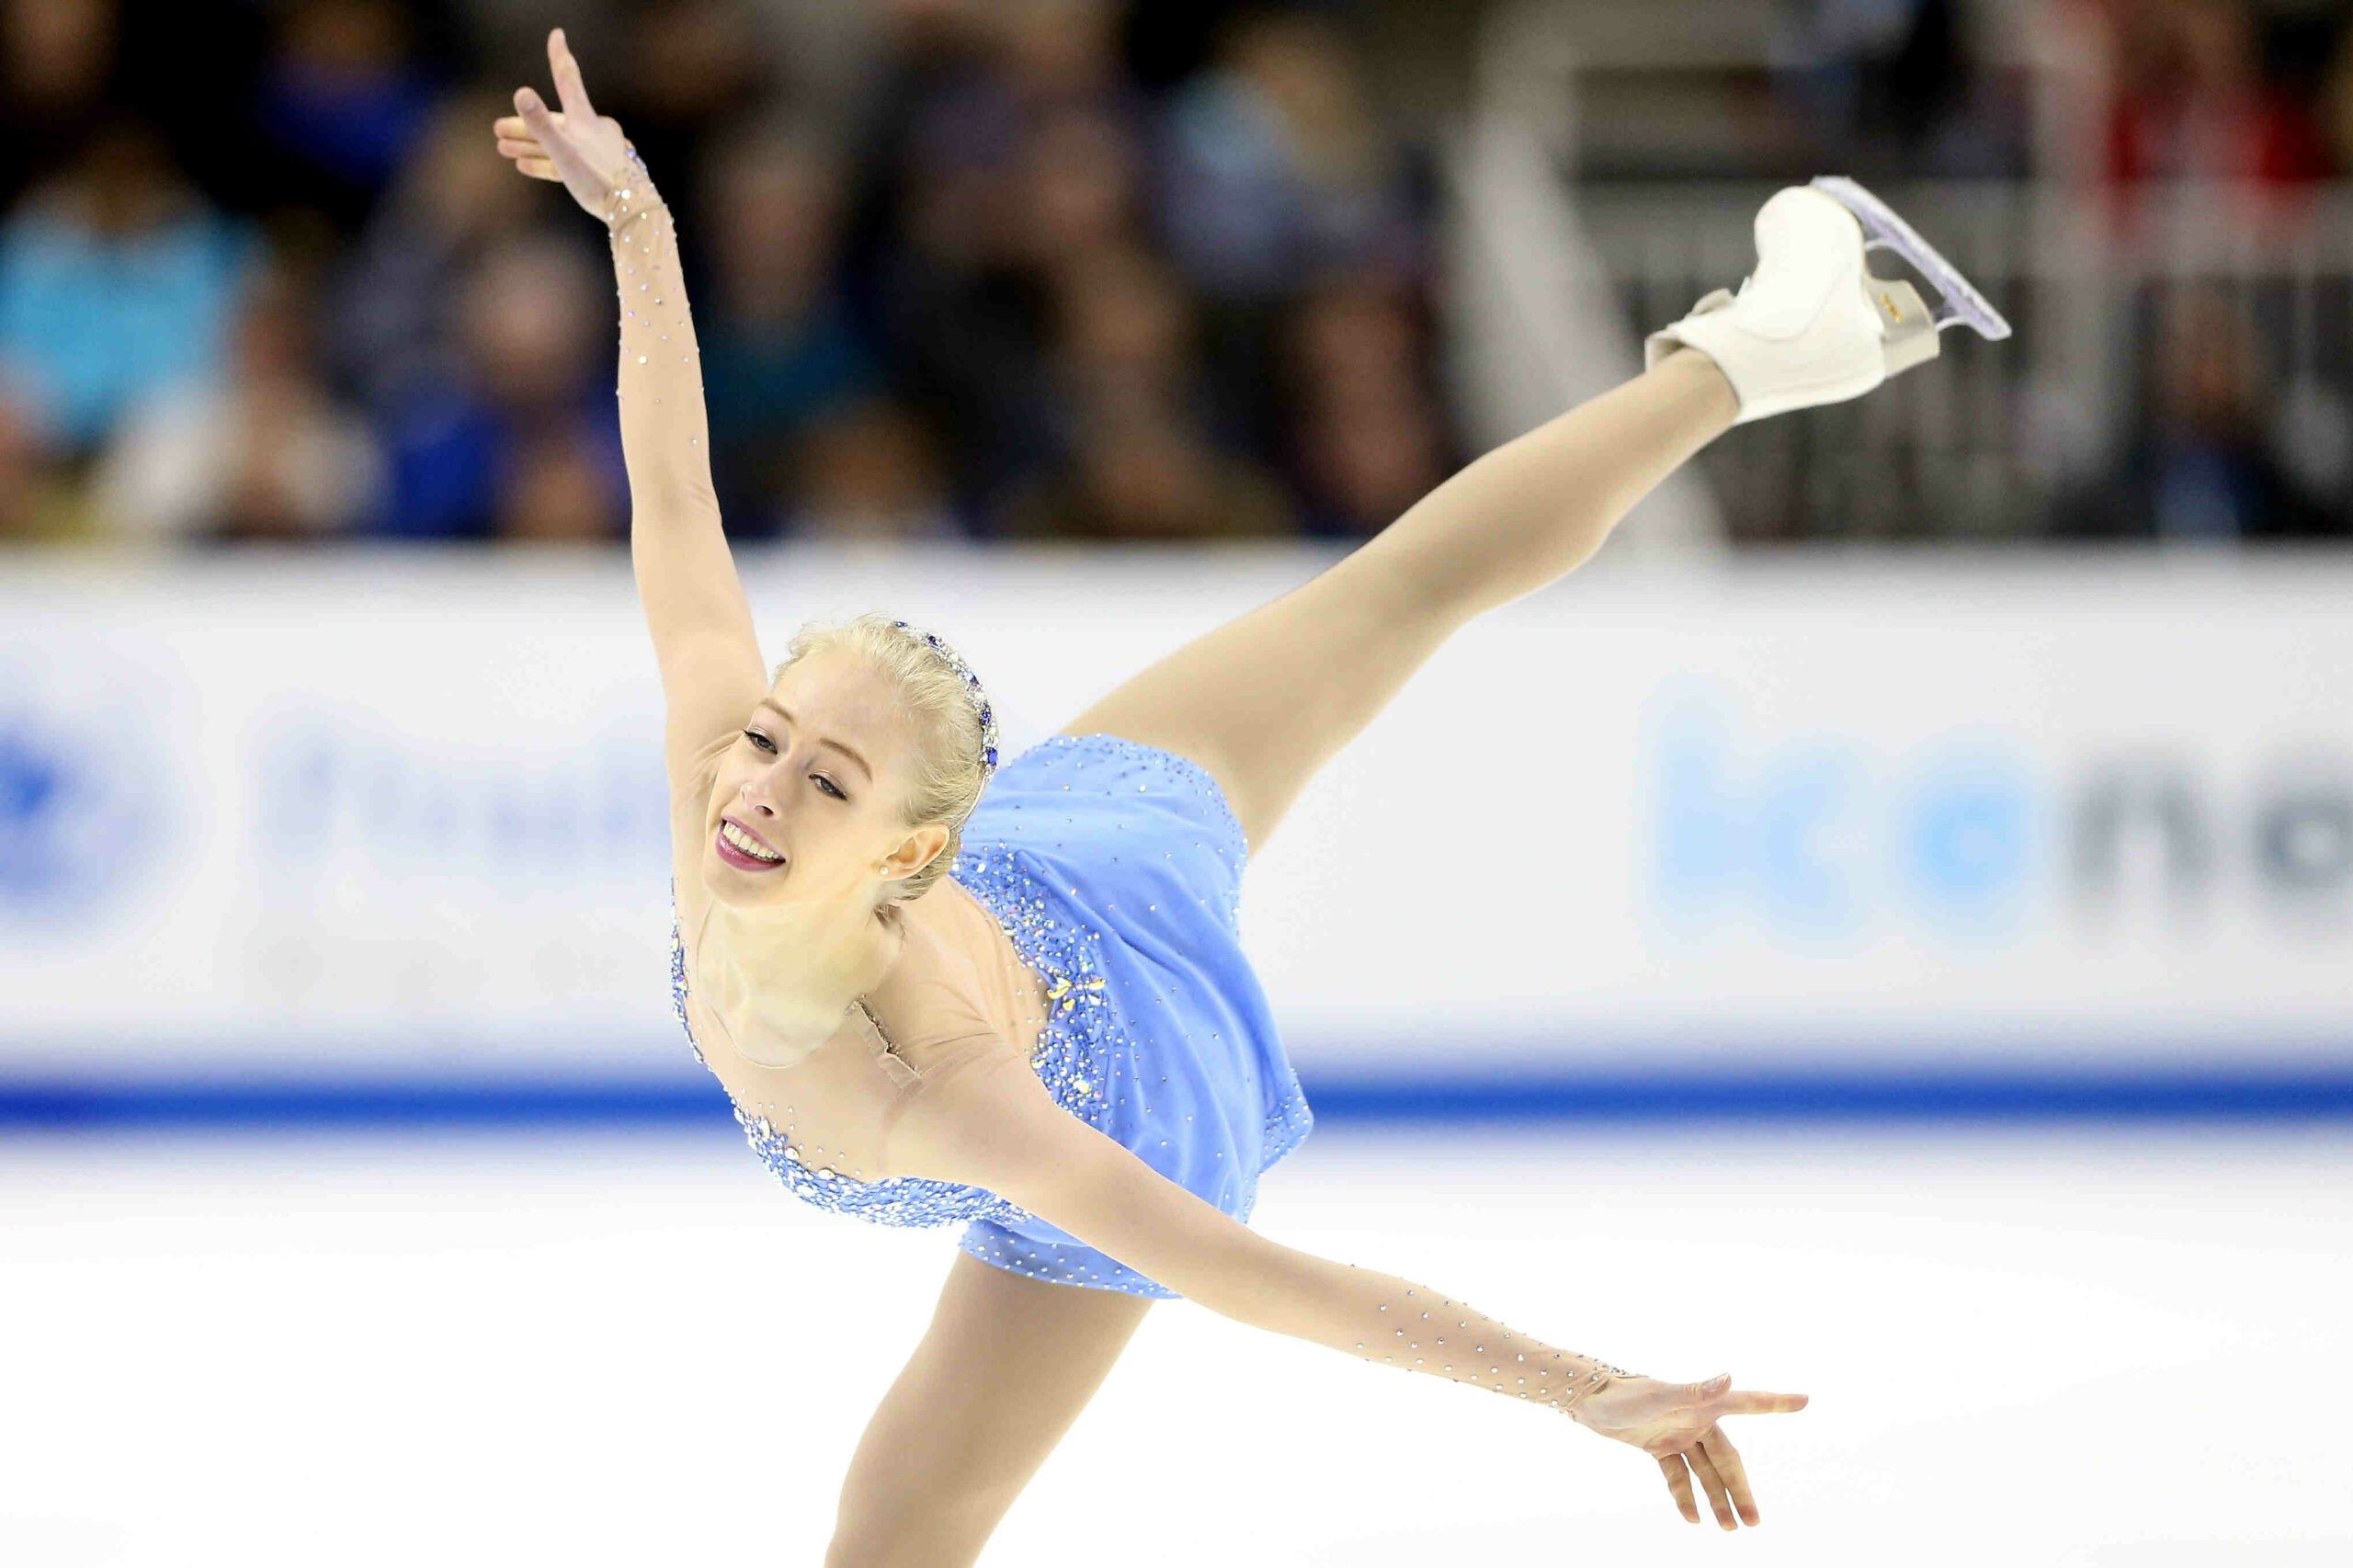 How long does it take to become a good figure skater?